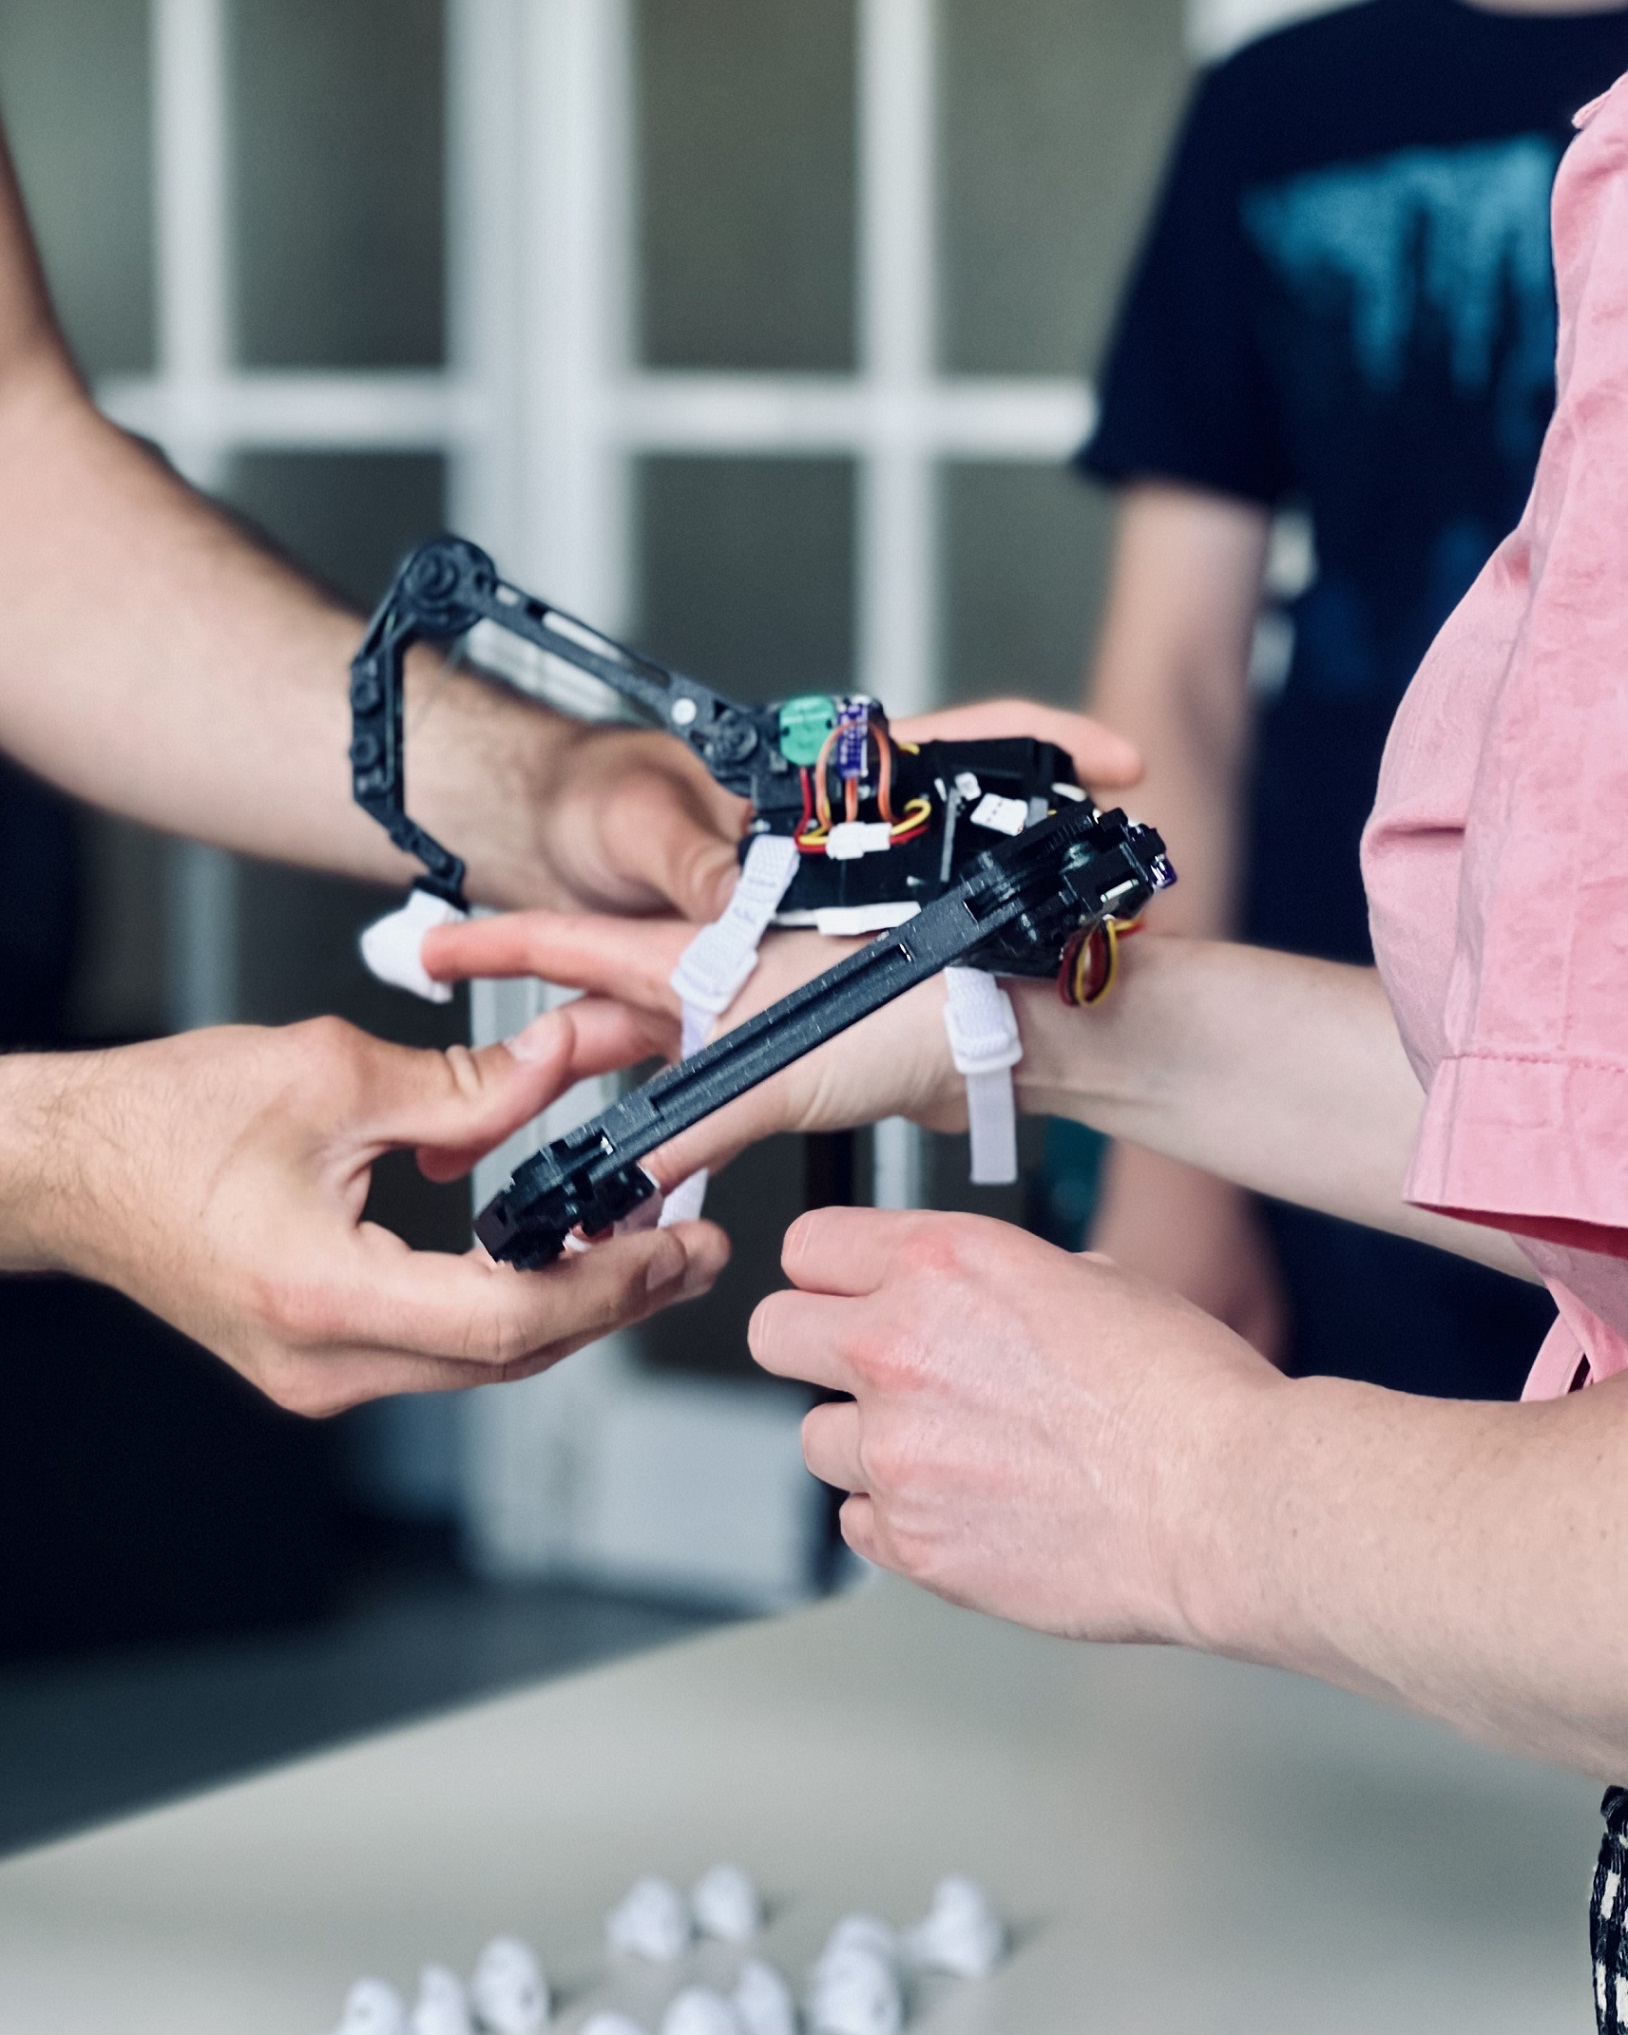 Image of a person helping another person to put on a robotic hand